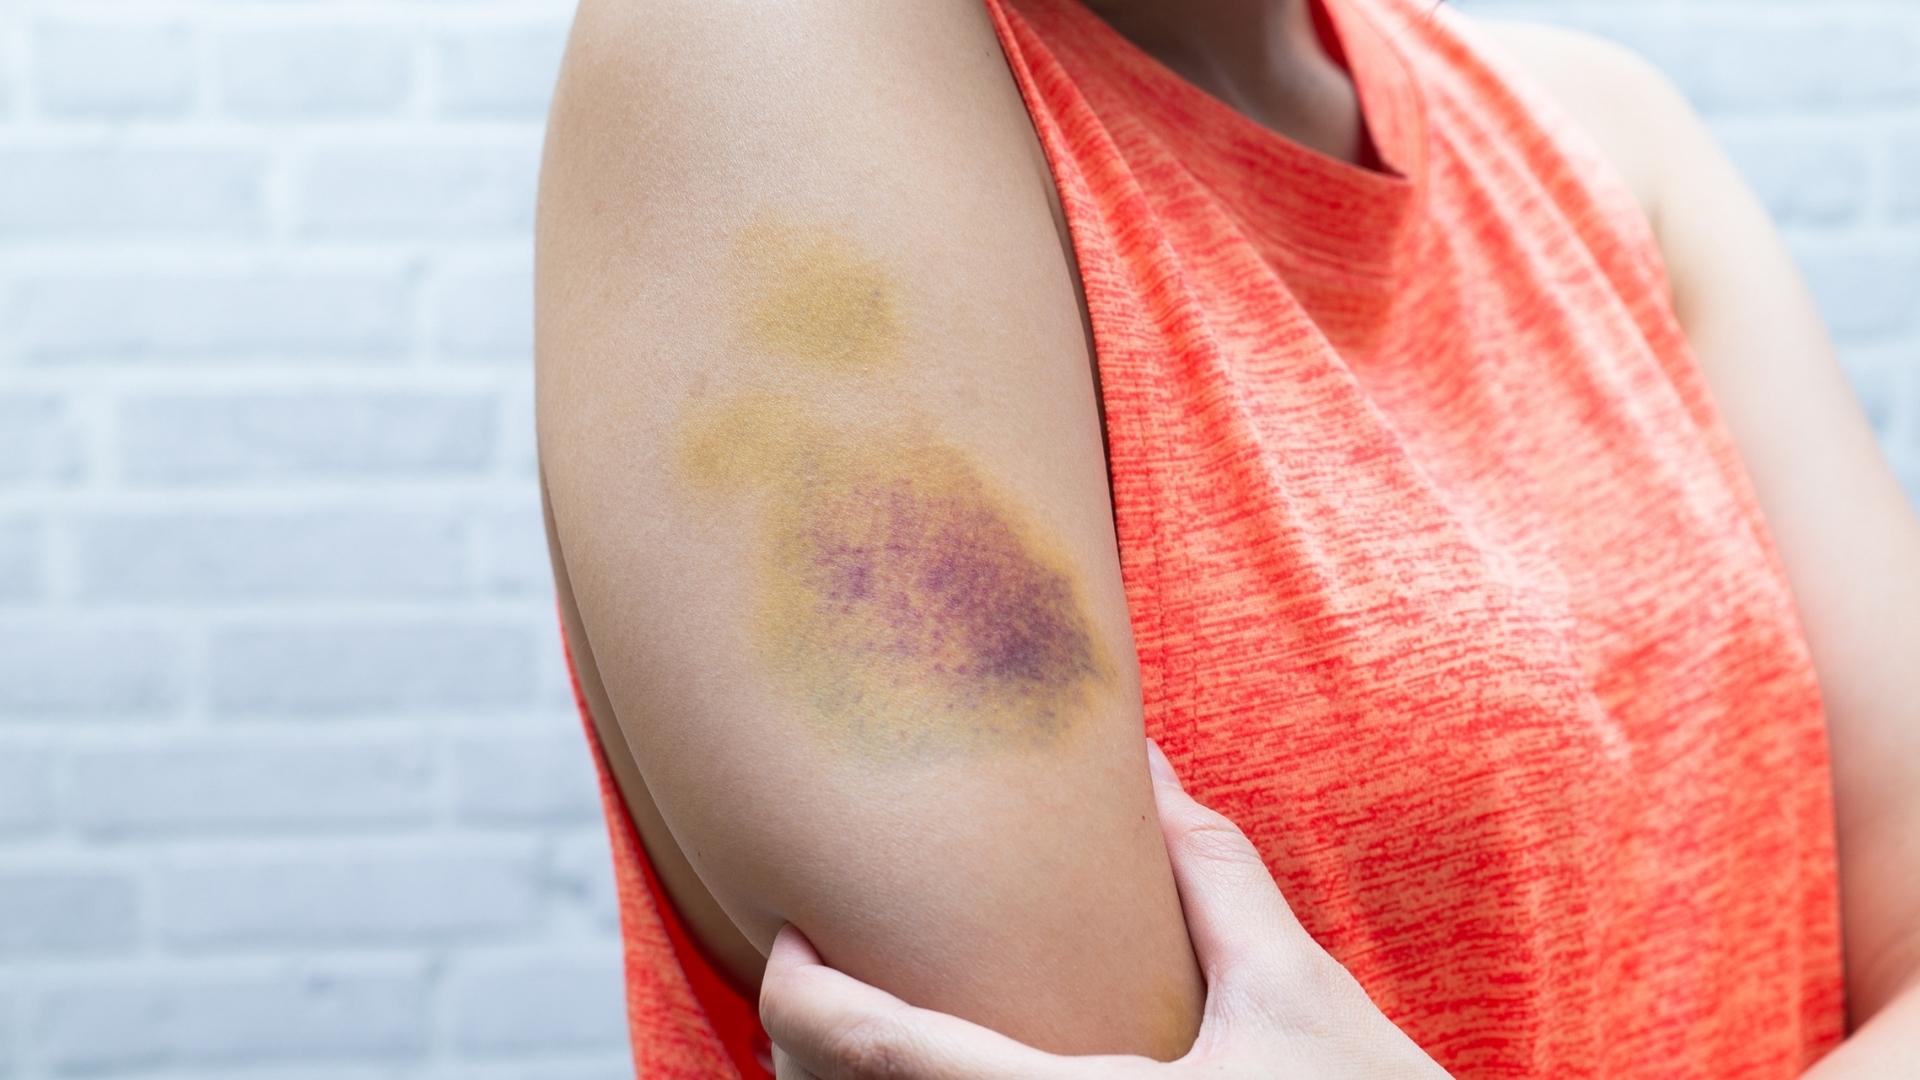 How to Make a Bruise Stop Hurting